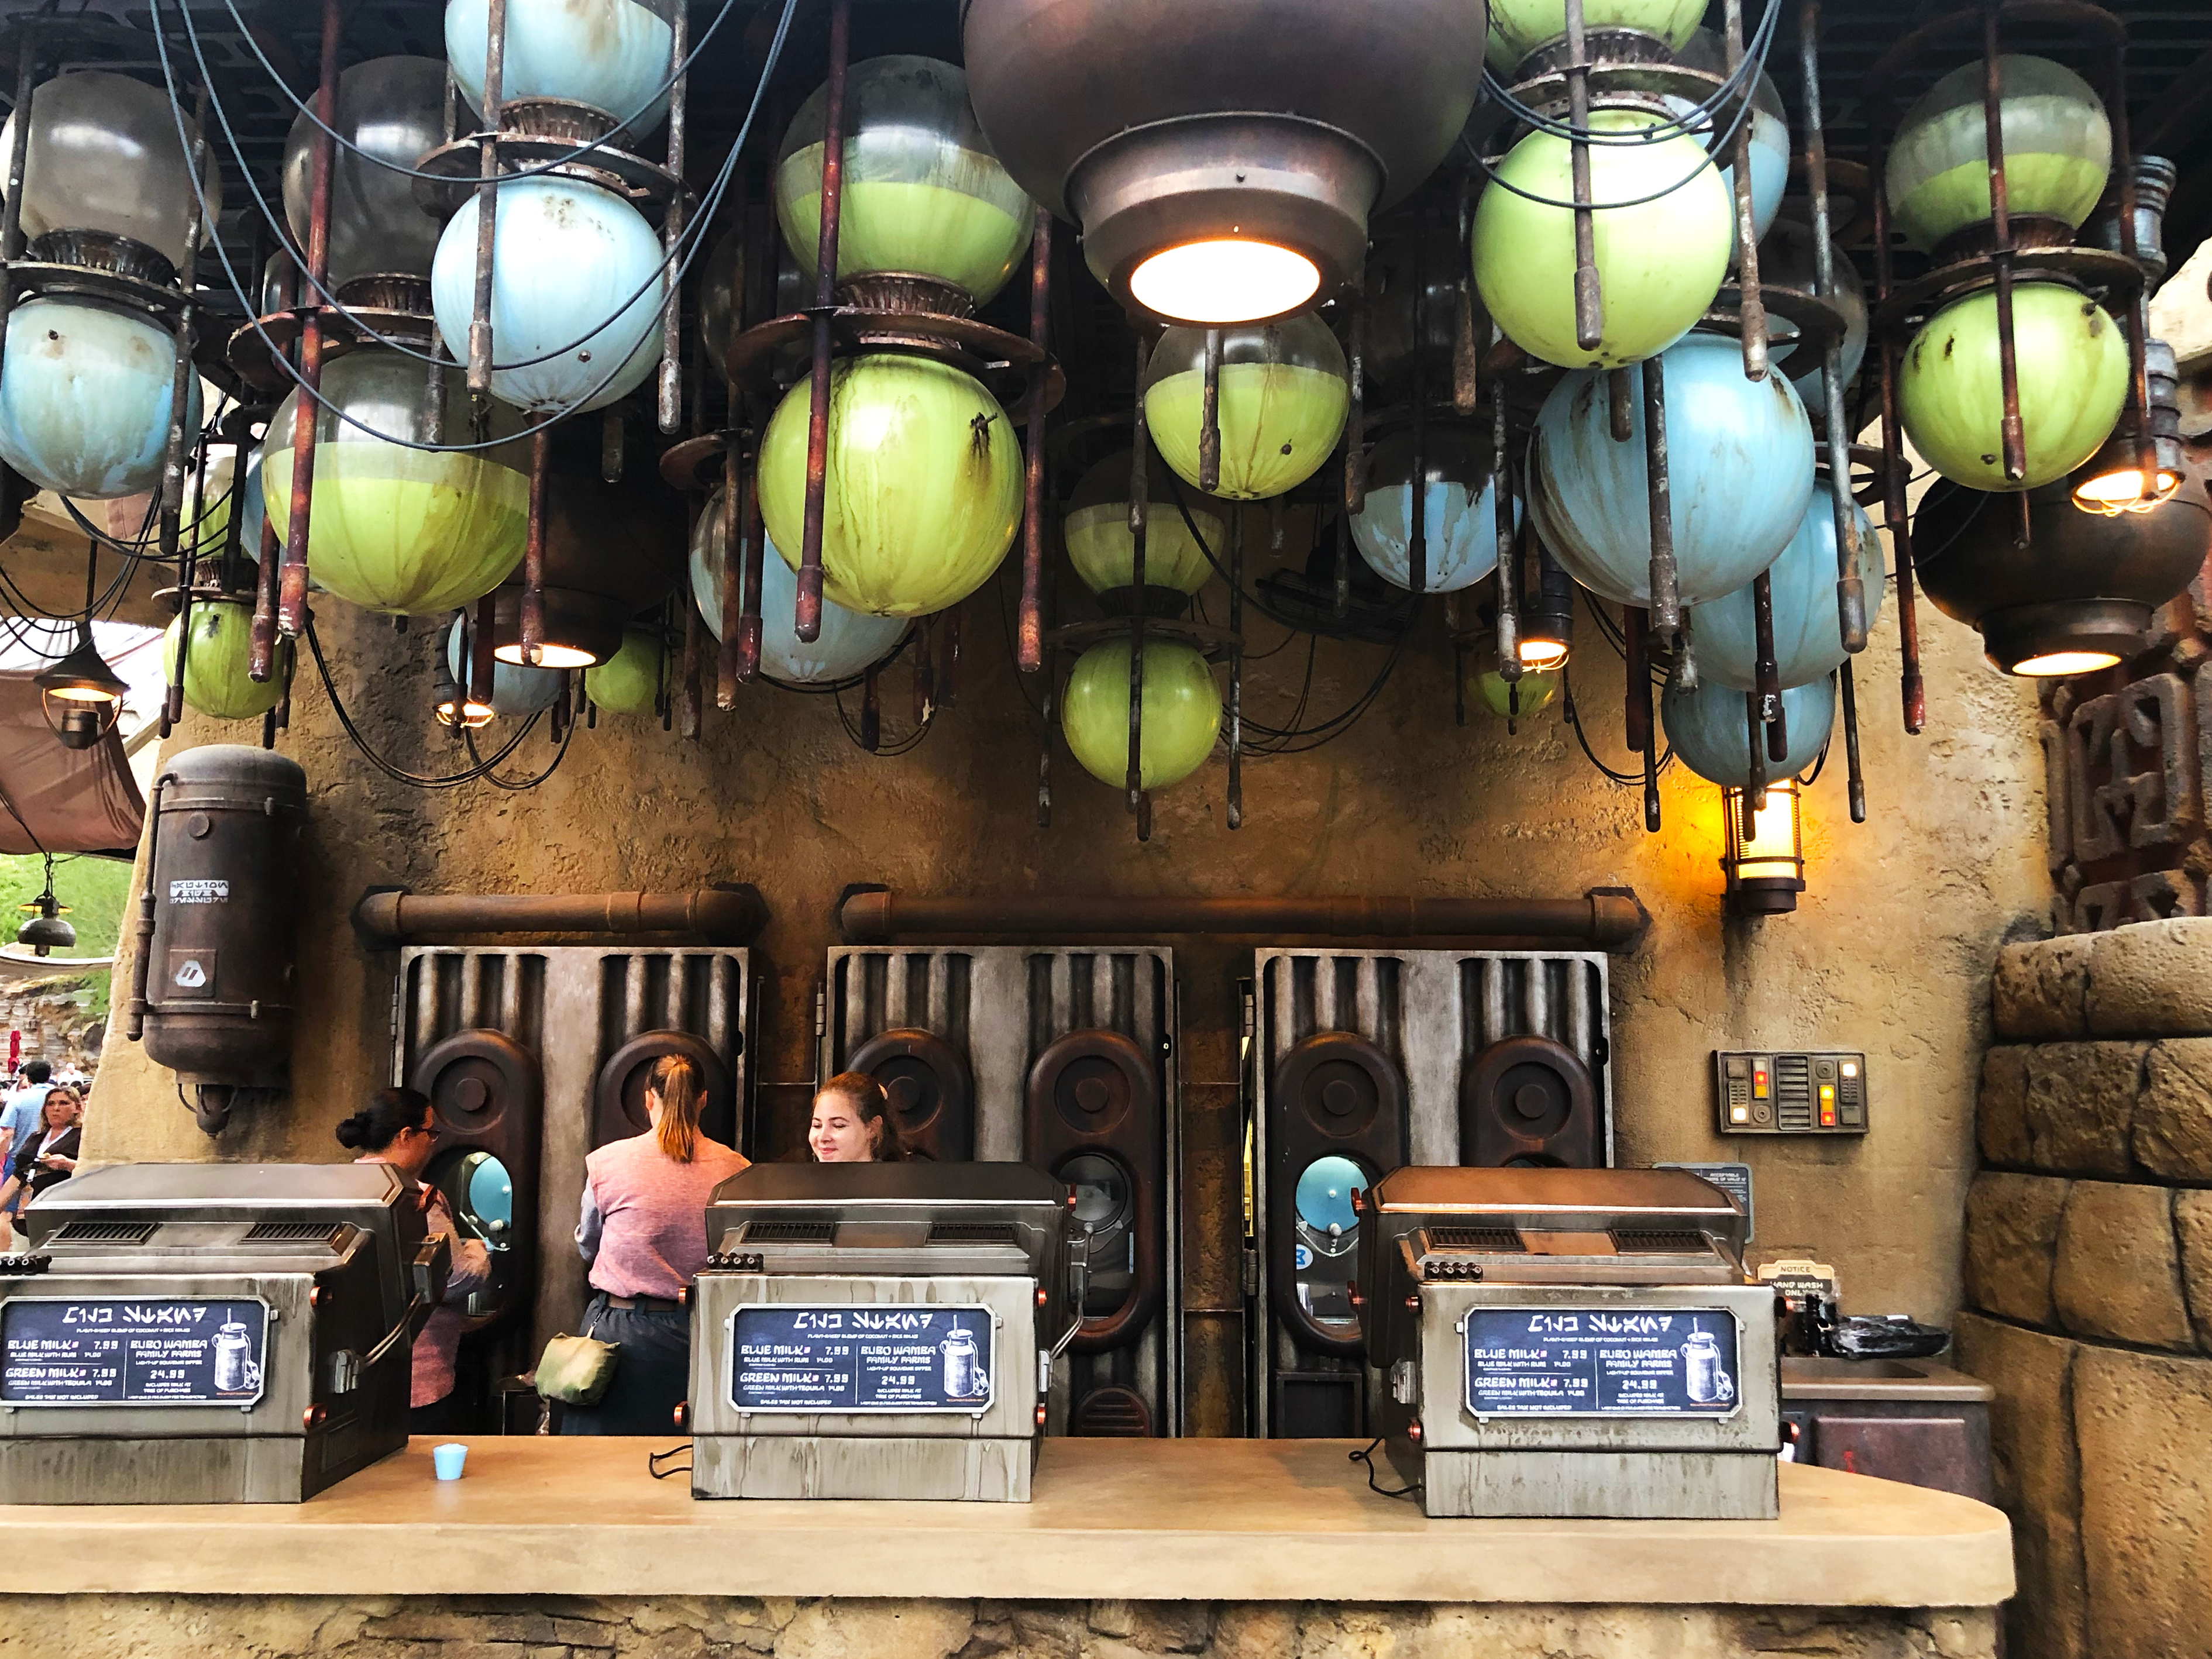 A daytime shot of The Milk Stand. Three cast members are seen behind the counter of cash registers, one (female, middle) is smiling while two (both females) have their backs turned as they dispense blue milk from the machines. Star Wars: Galaxy's Edge at Disney's Hollywood Studios®. Lake Buena Vista, Florida.